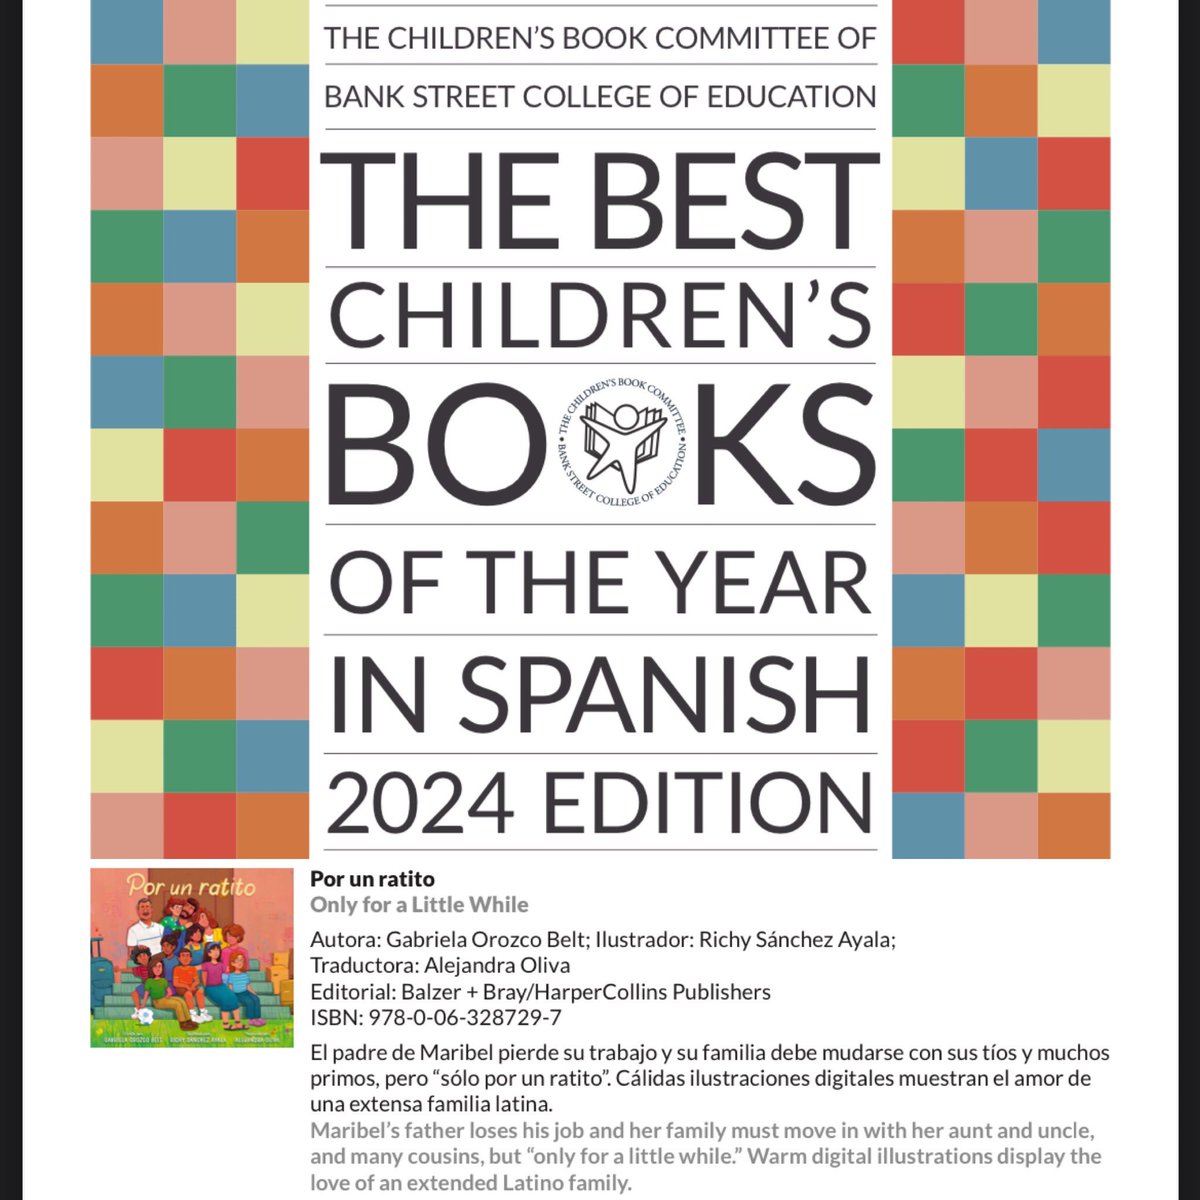 Honored to have Por un ratito on the Bank Street College of Education Best Children’s Books of the Year in Spanish! 
Thank you @olivalejandra for your hard work and always to Richy Sanchez Ayala 
Happy to share space with so many amazing titles and so many musas! @lasmusasbooks